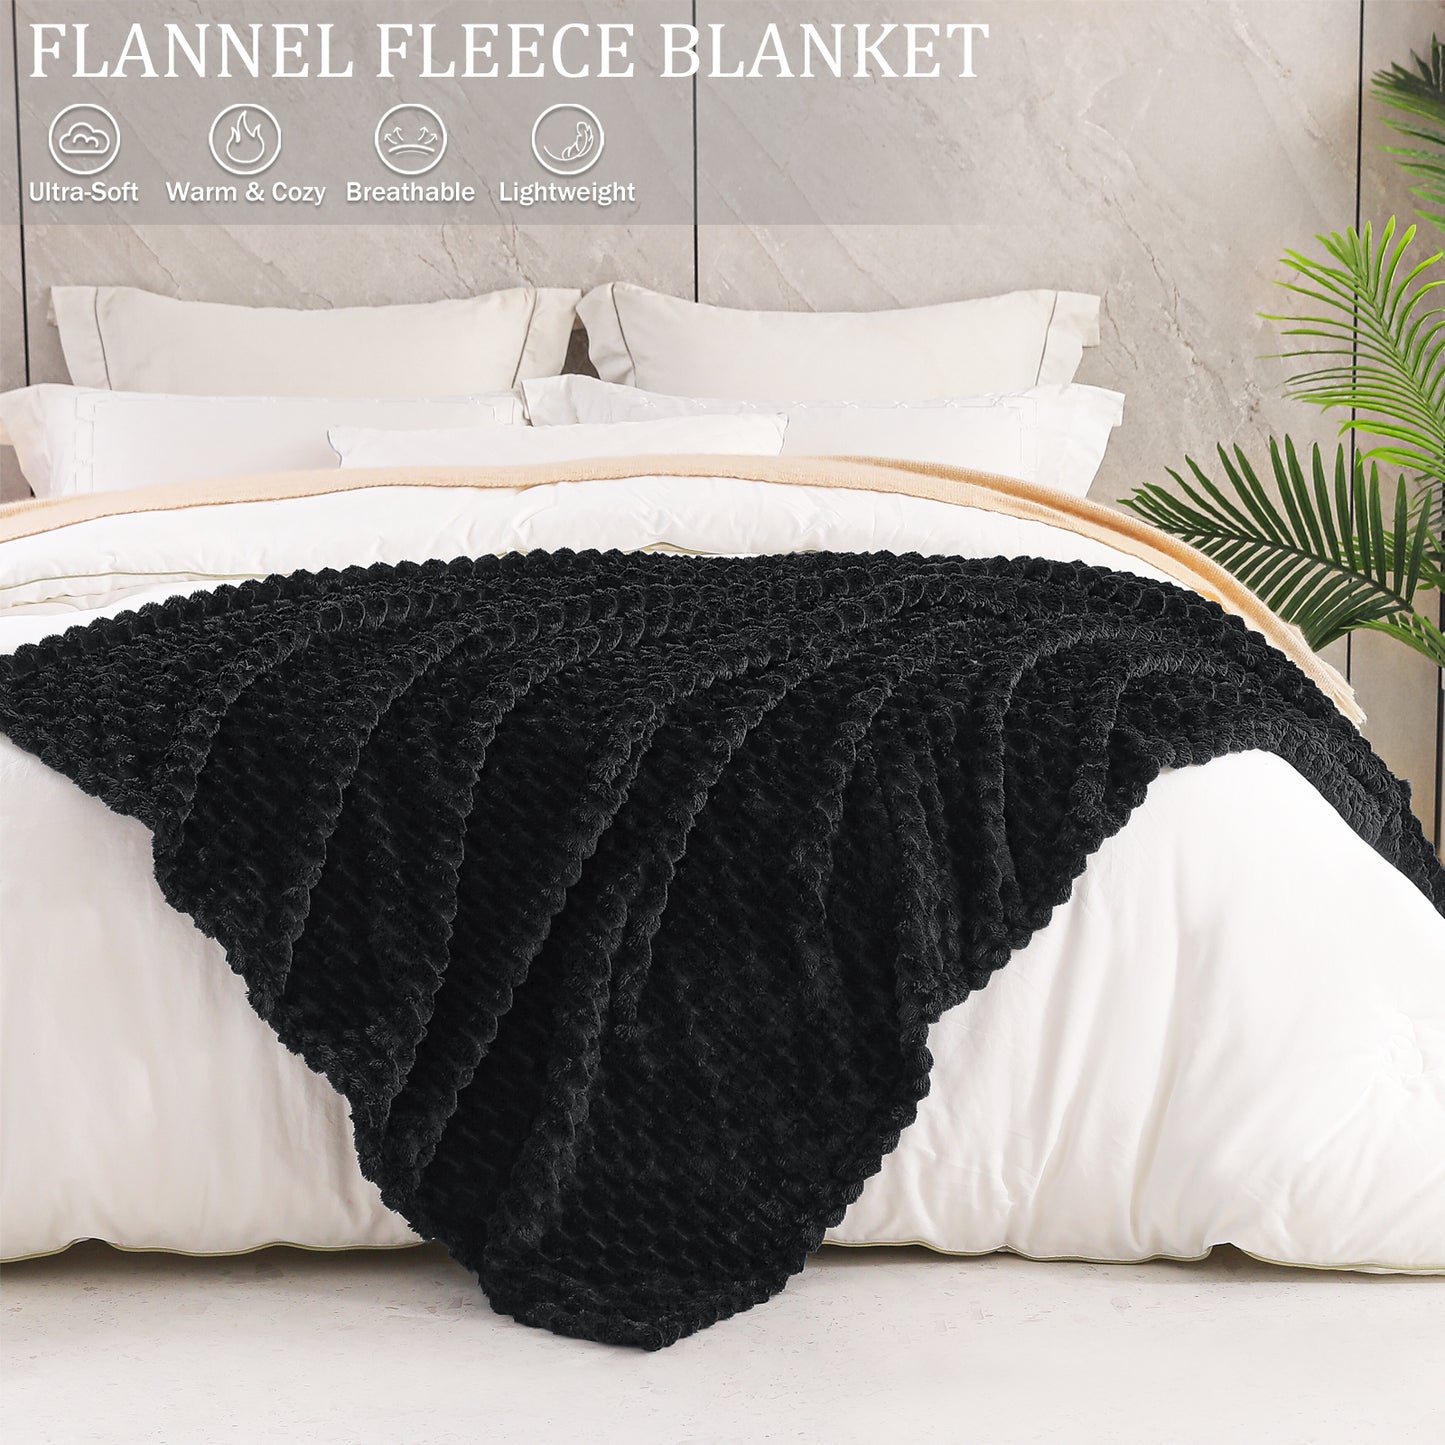 Exclusivo Mezcla Queen Size Flannel Fleece Blanket, 90x90 Inches Stylish Jacquard Velvet Plush Blanket for Bed, Cozy, Warm, Lightweight and Decorative Black Blanket